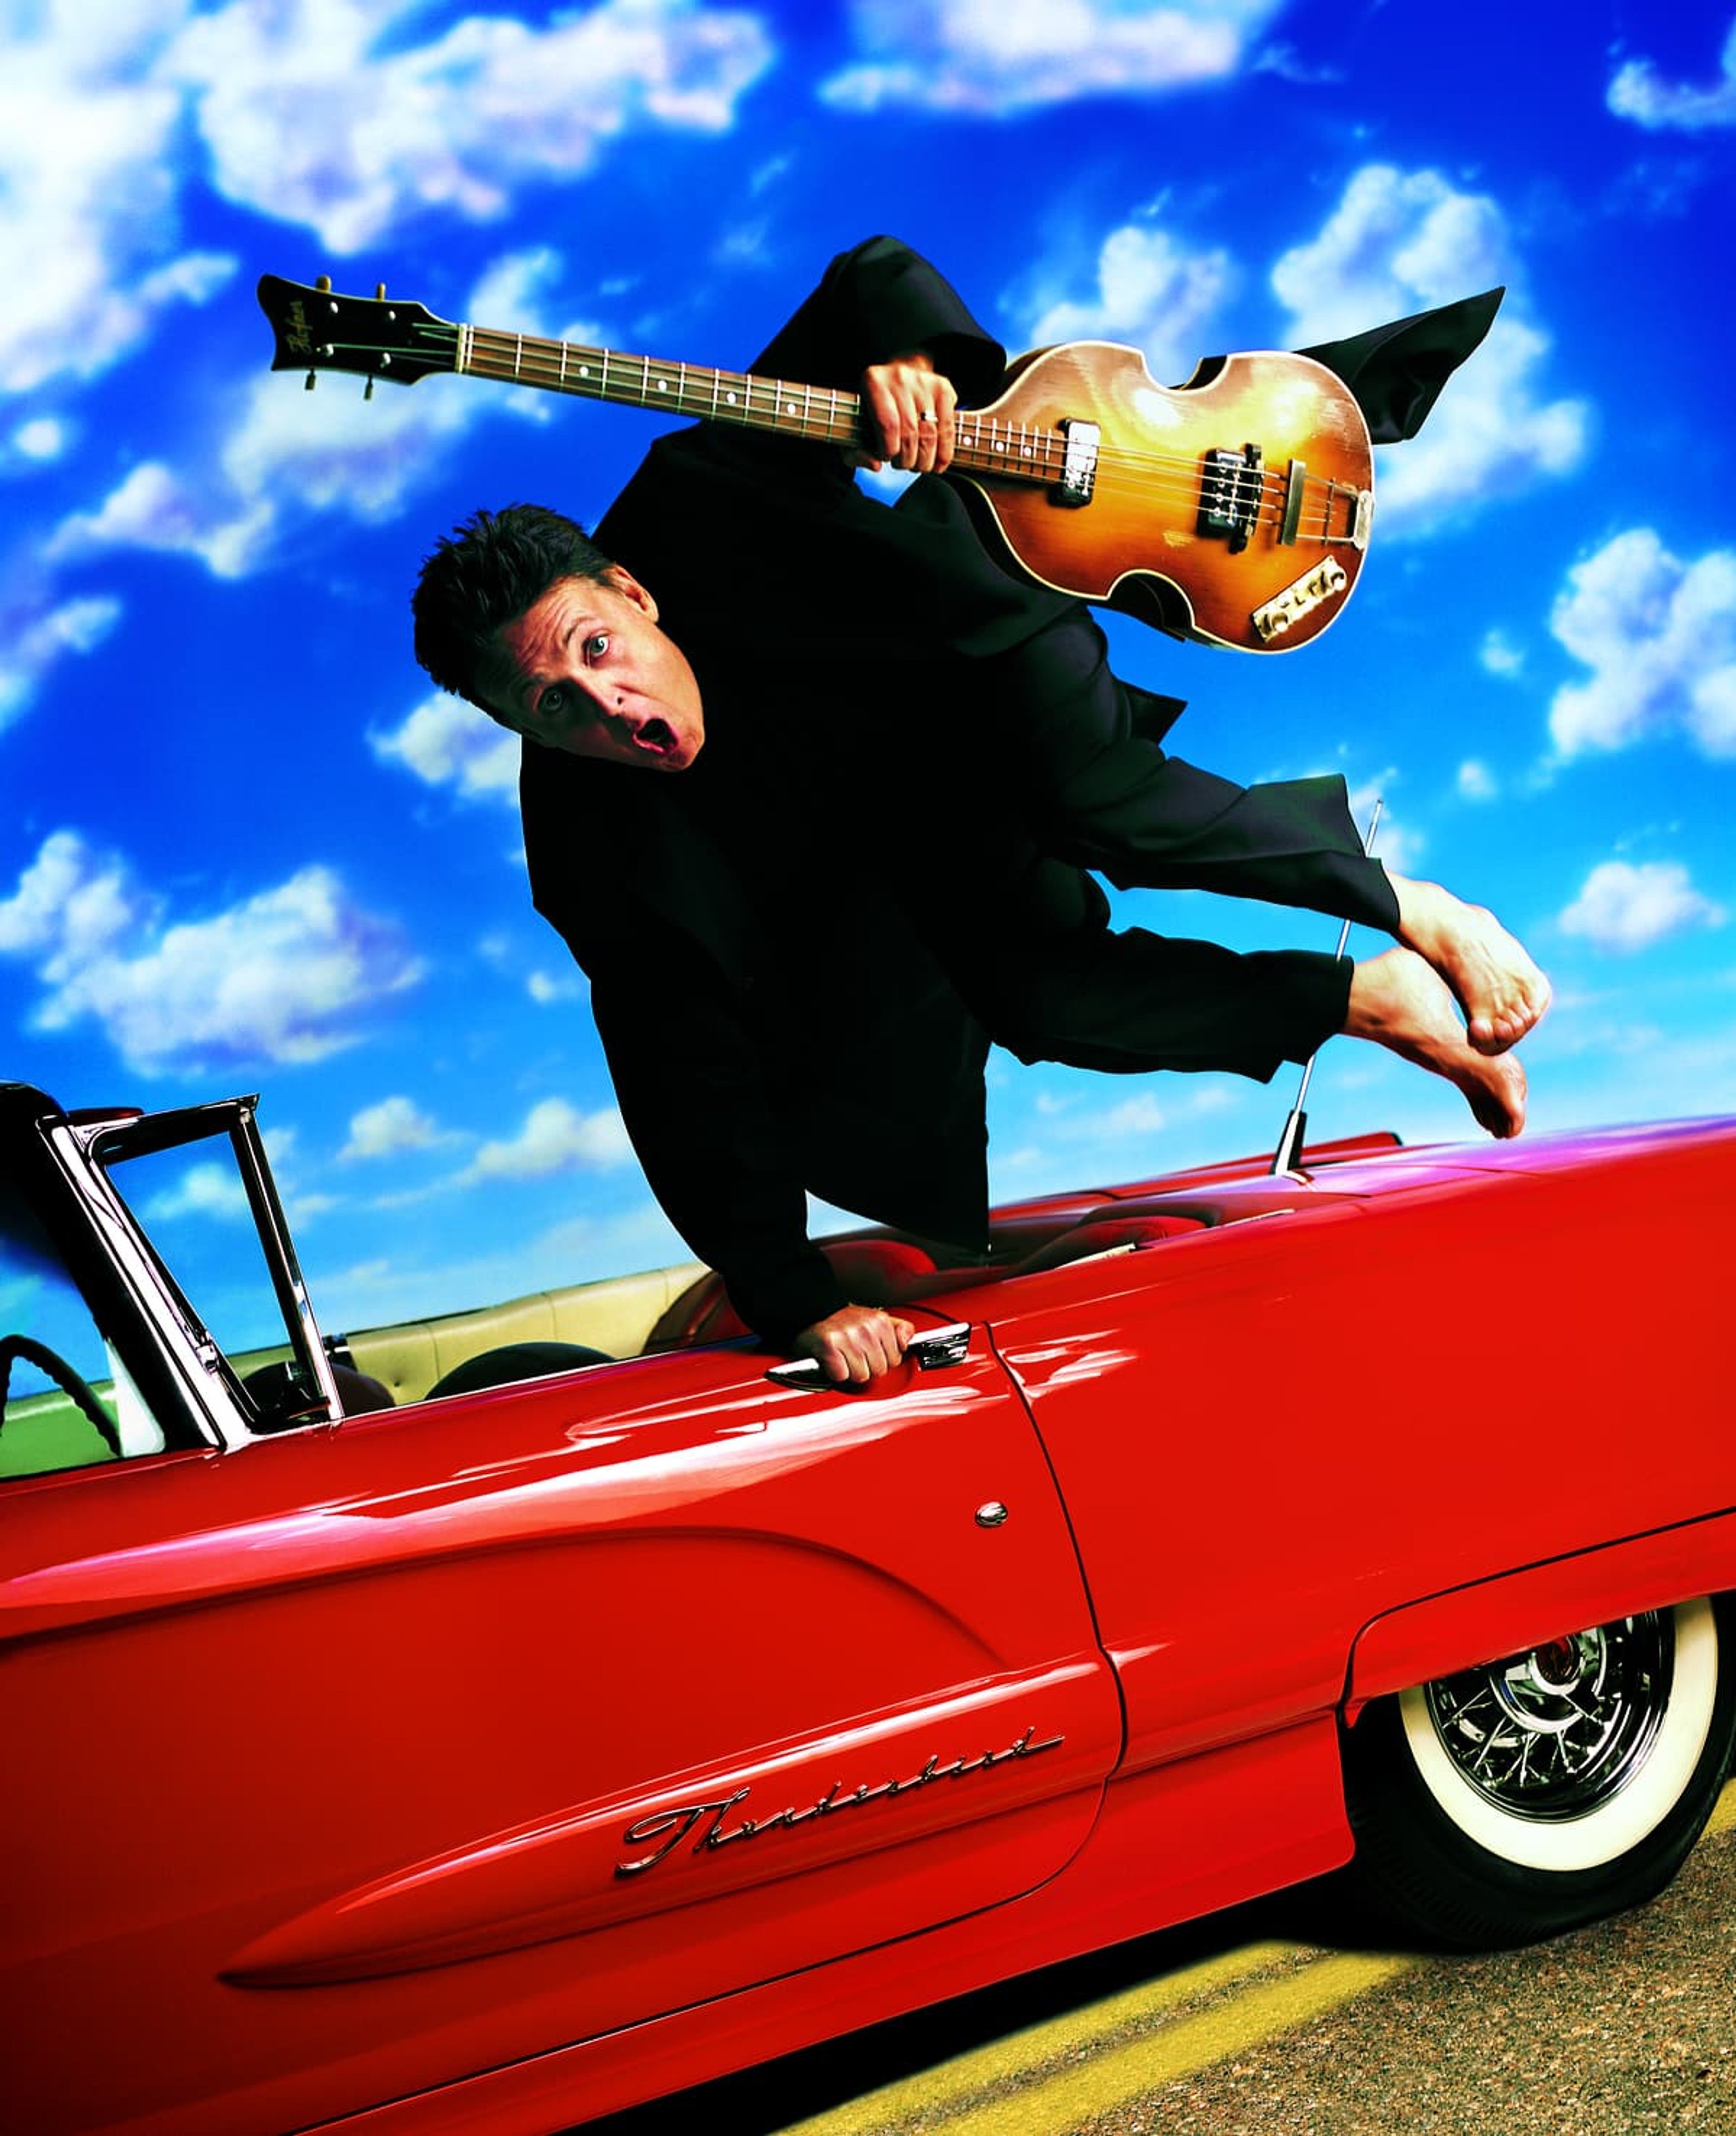 Paul jumping over a red car, holding a bass guitar